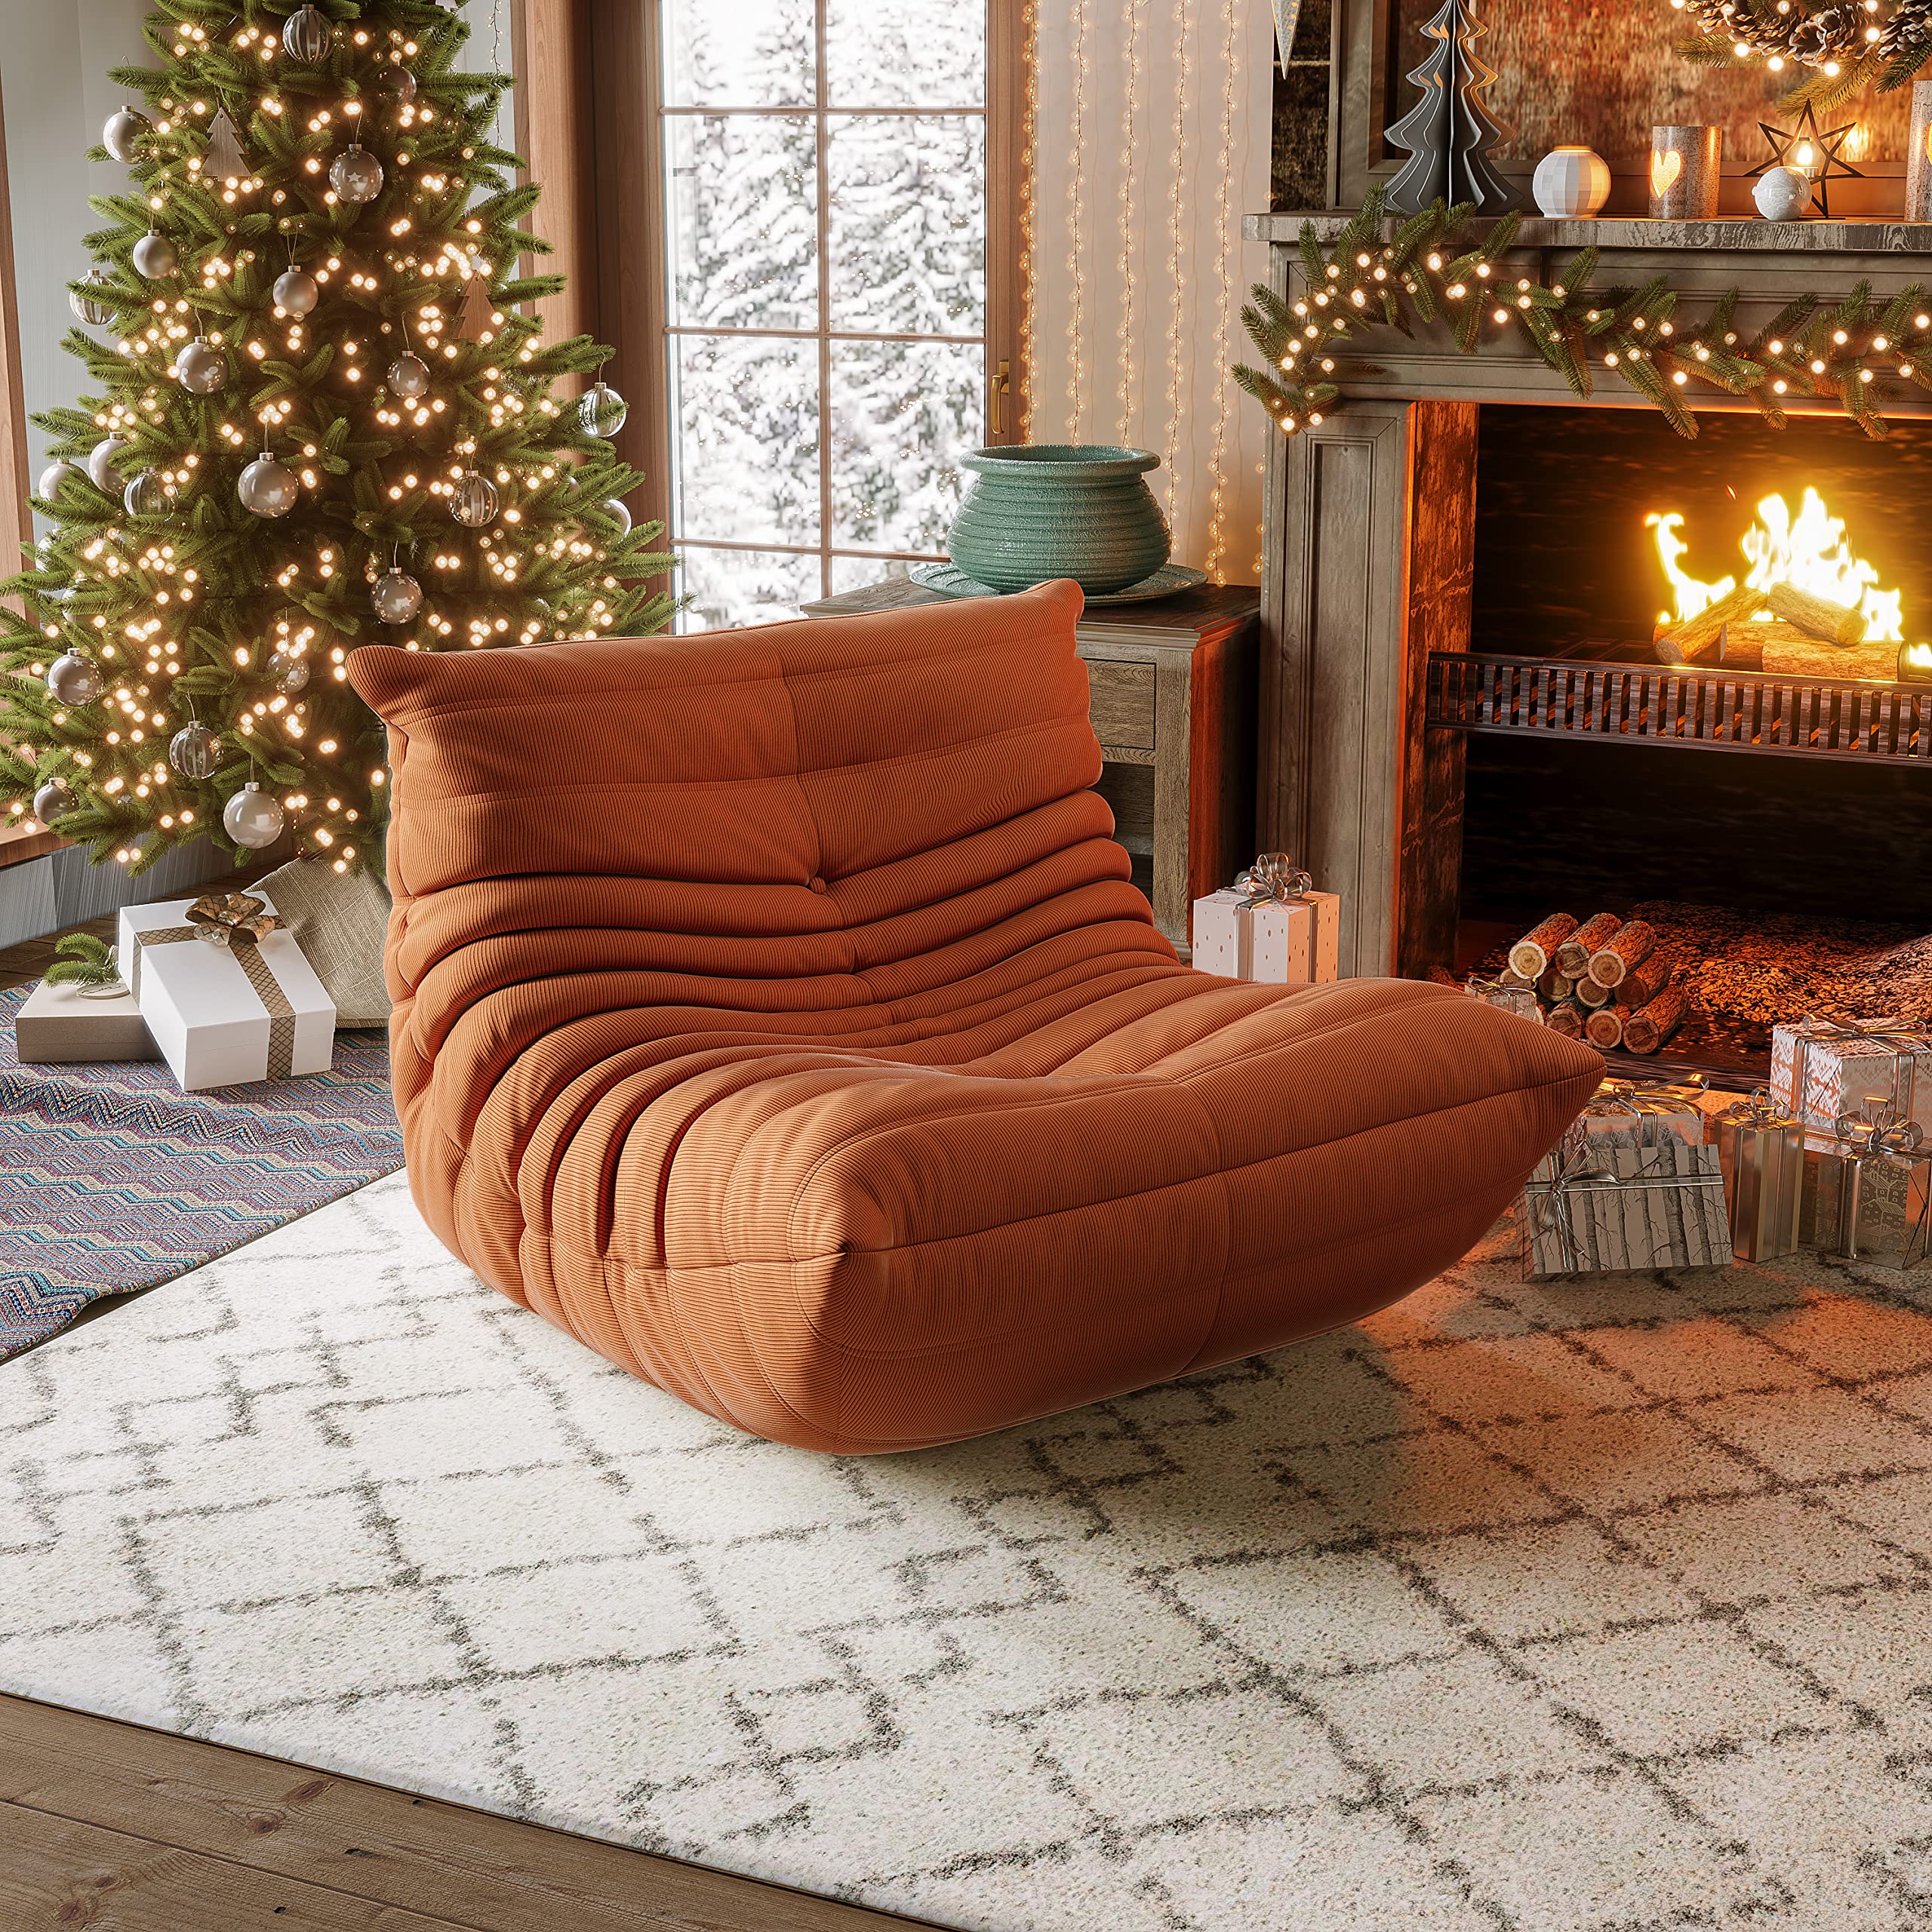 1inchome Fireside Chair, Soft Corduroy Lounge Chair Lazy Floor Sofa Accent Bean Bag Couch for Living Room Corner Chair Bedroom Salon Office